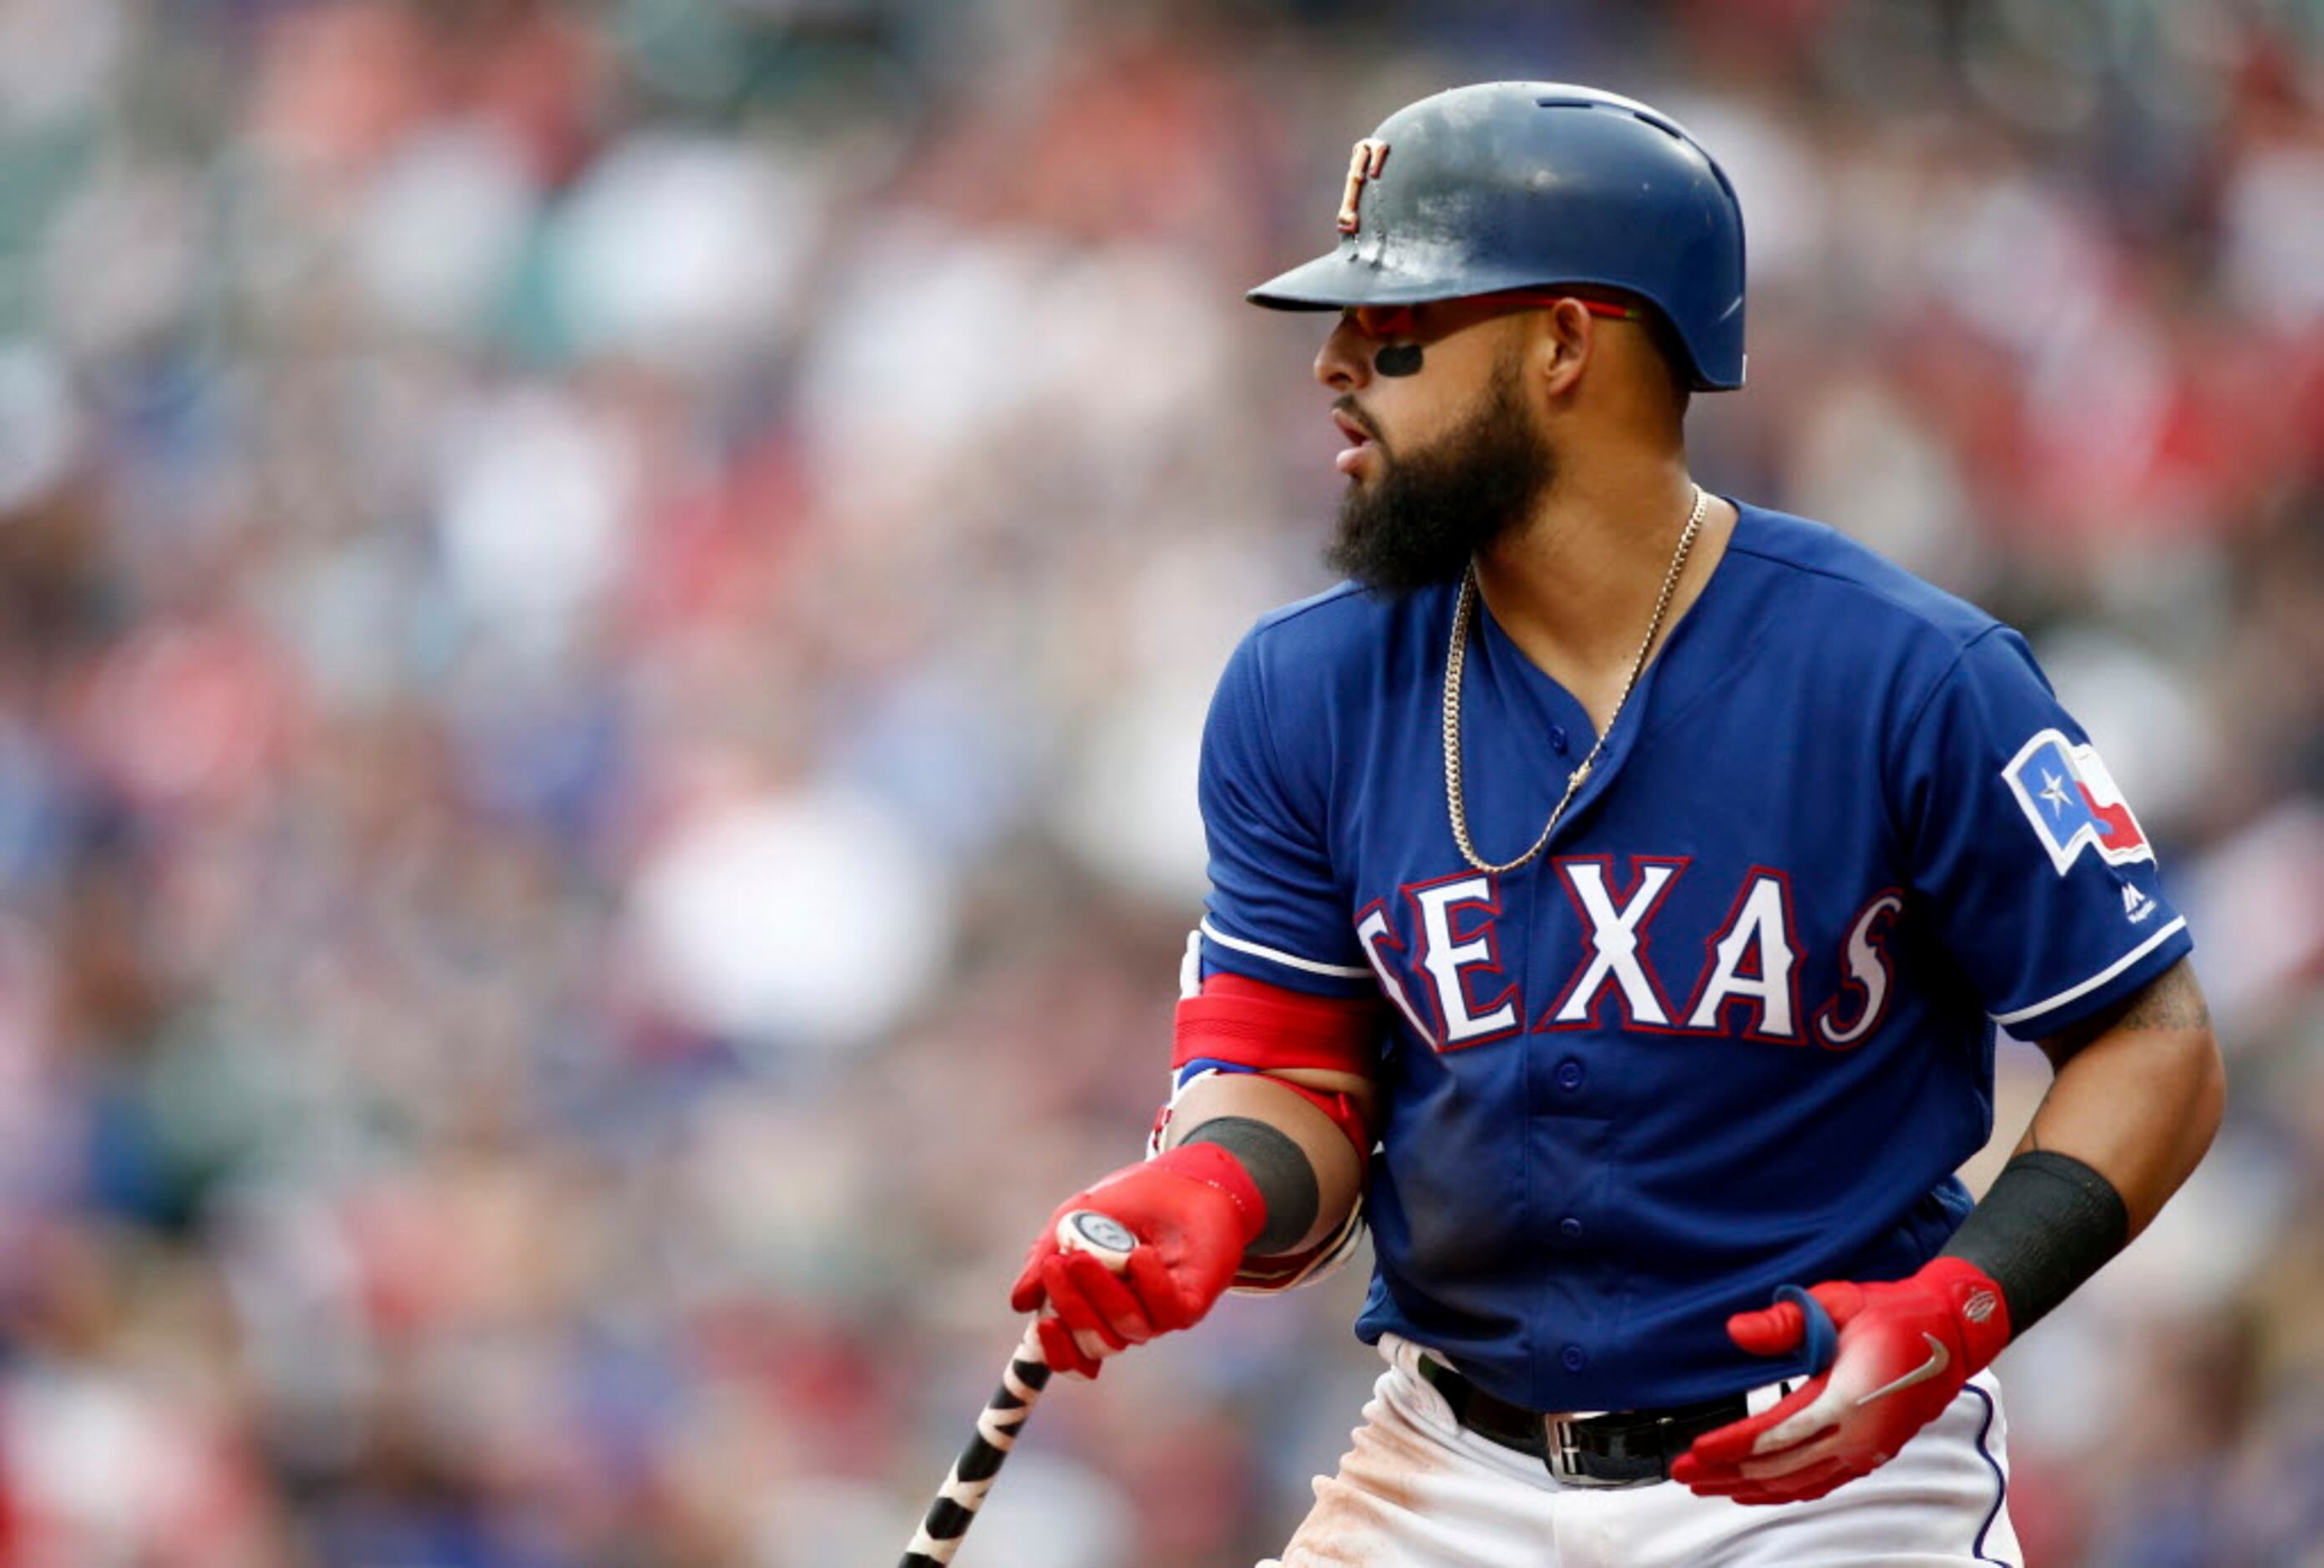 Rougned Odor has month left to keep job with Texas Rangers